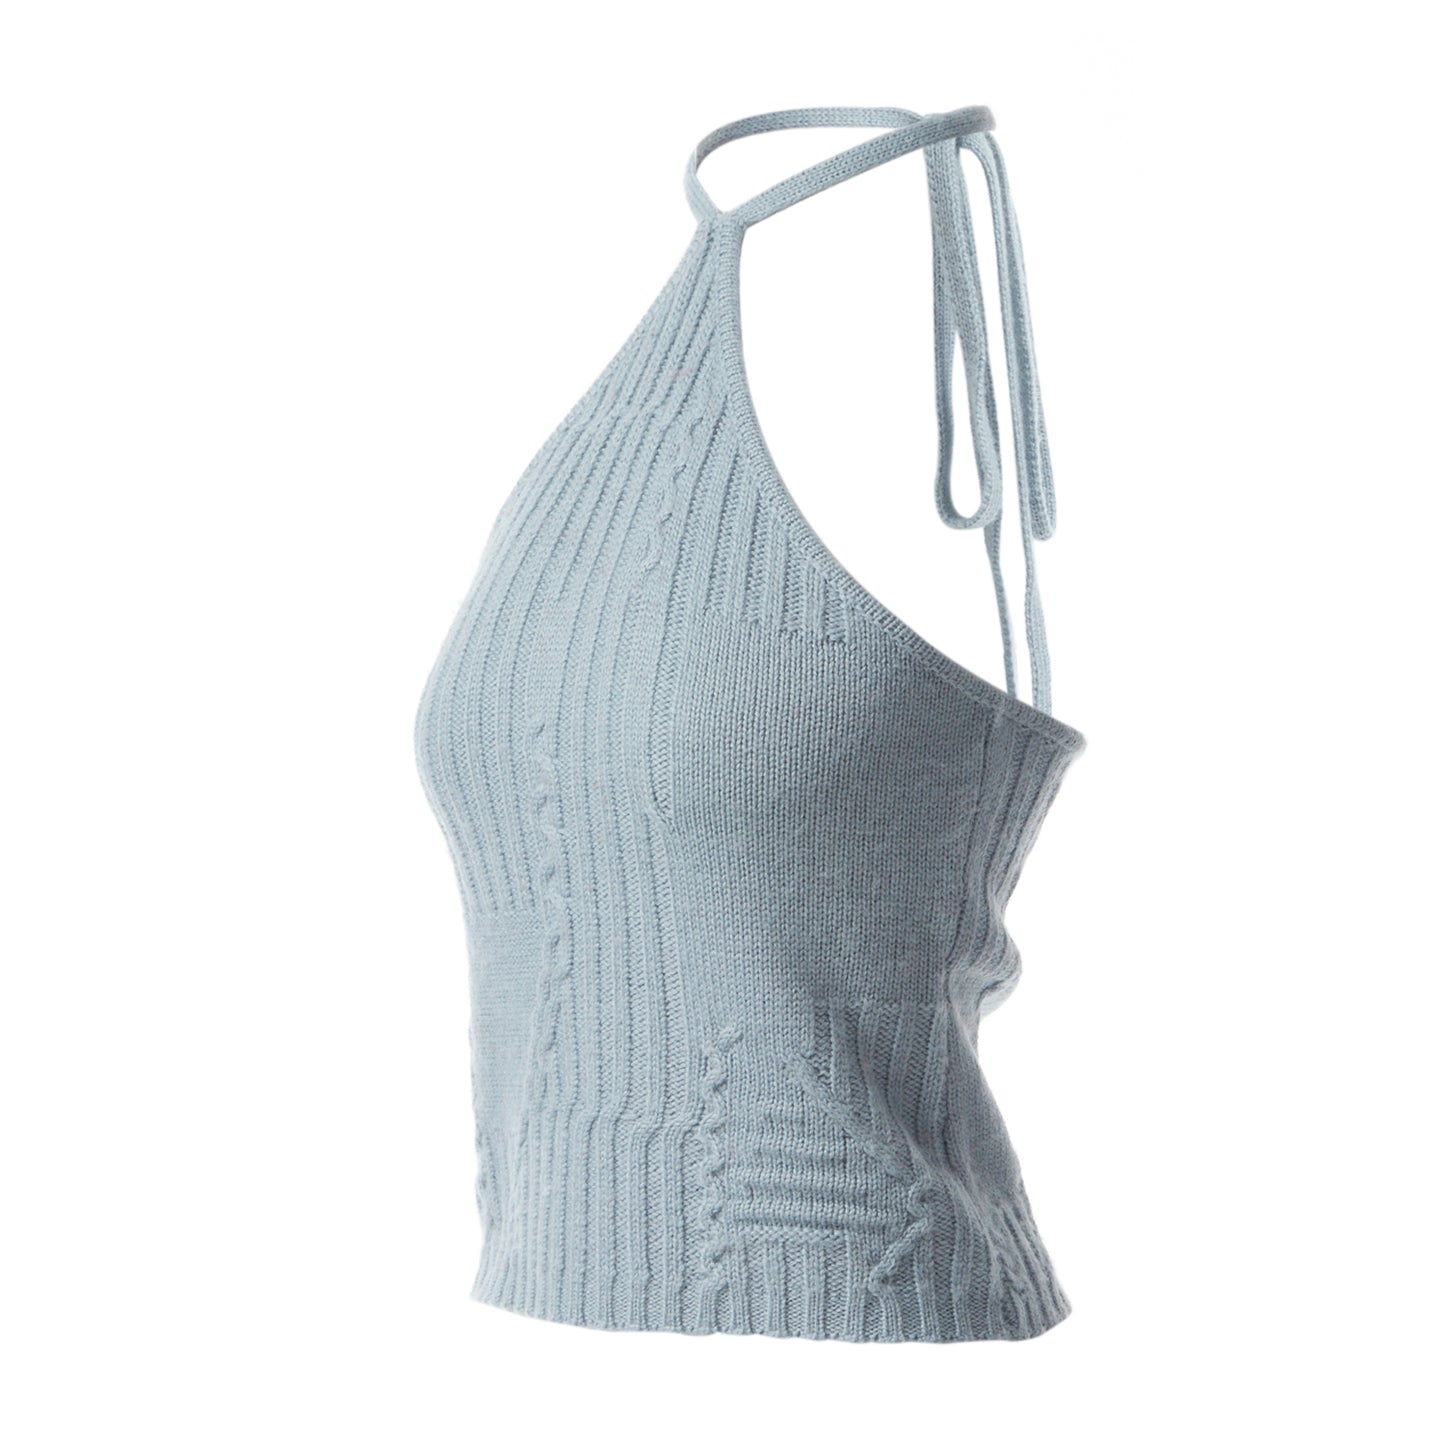 Fully Fashioning Freya Cable Knit Top